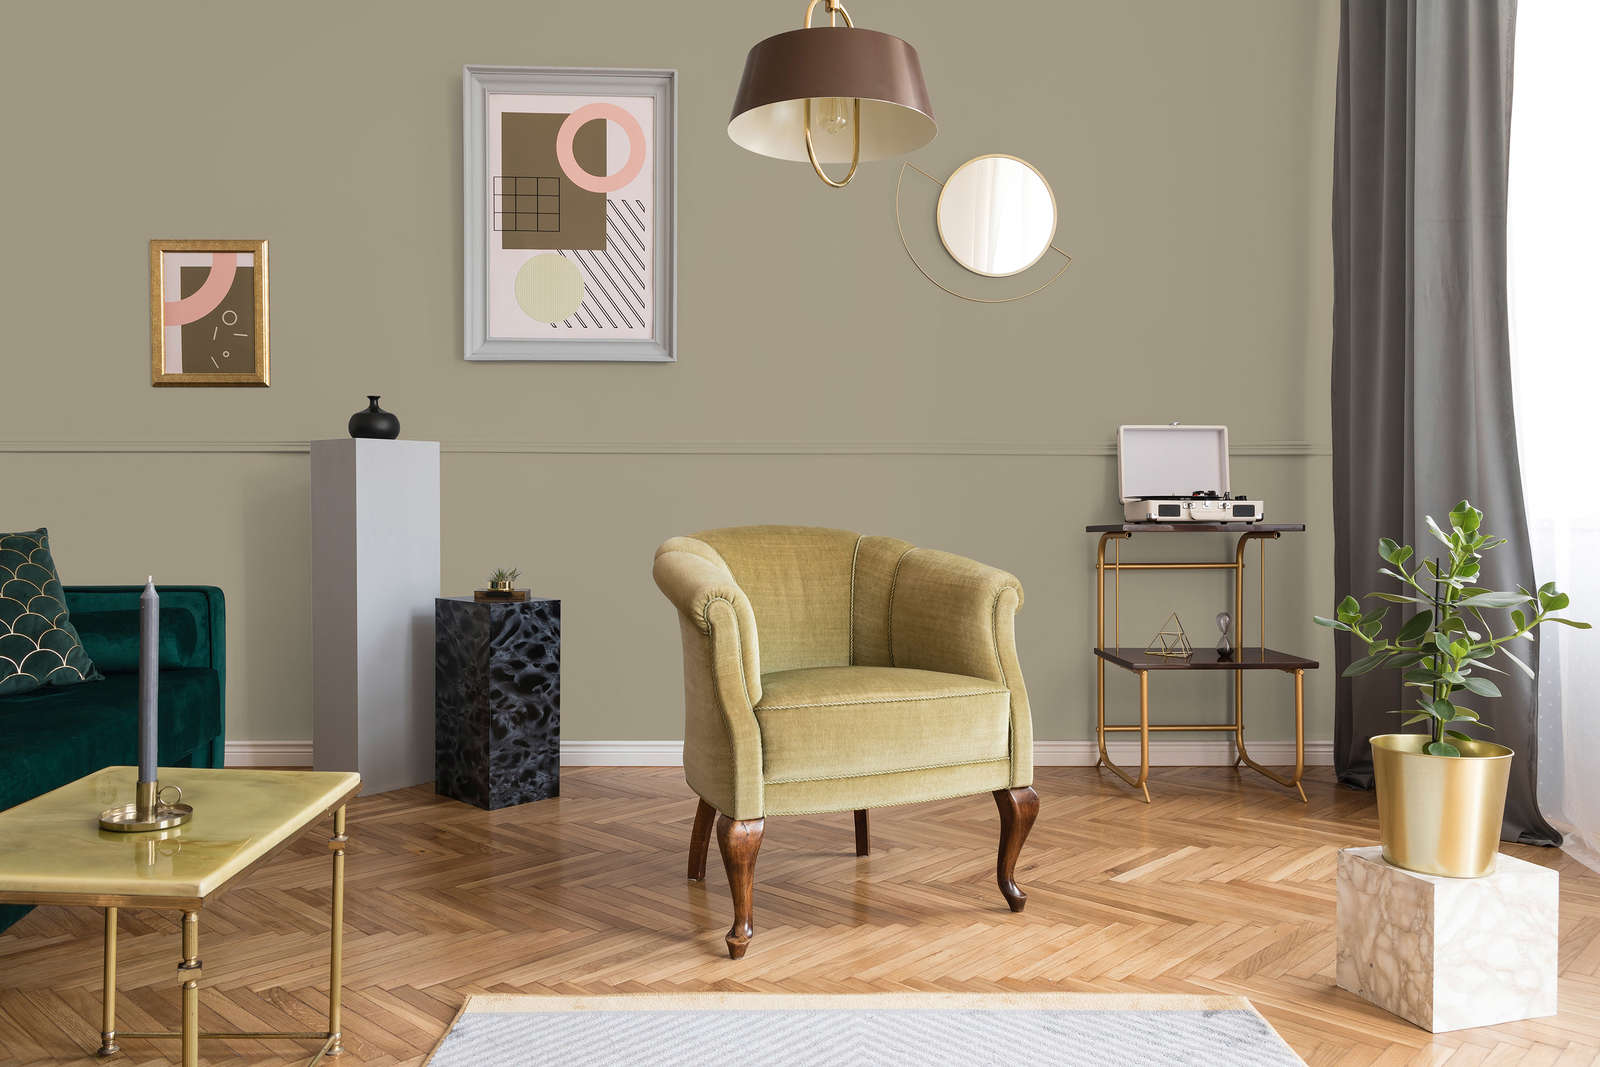             Premium Wall Paint homely light beige »Lucky Lime« NW604 – 2.5 litre
        